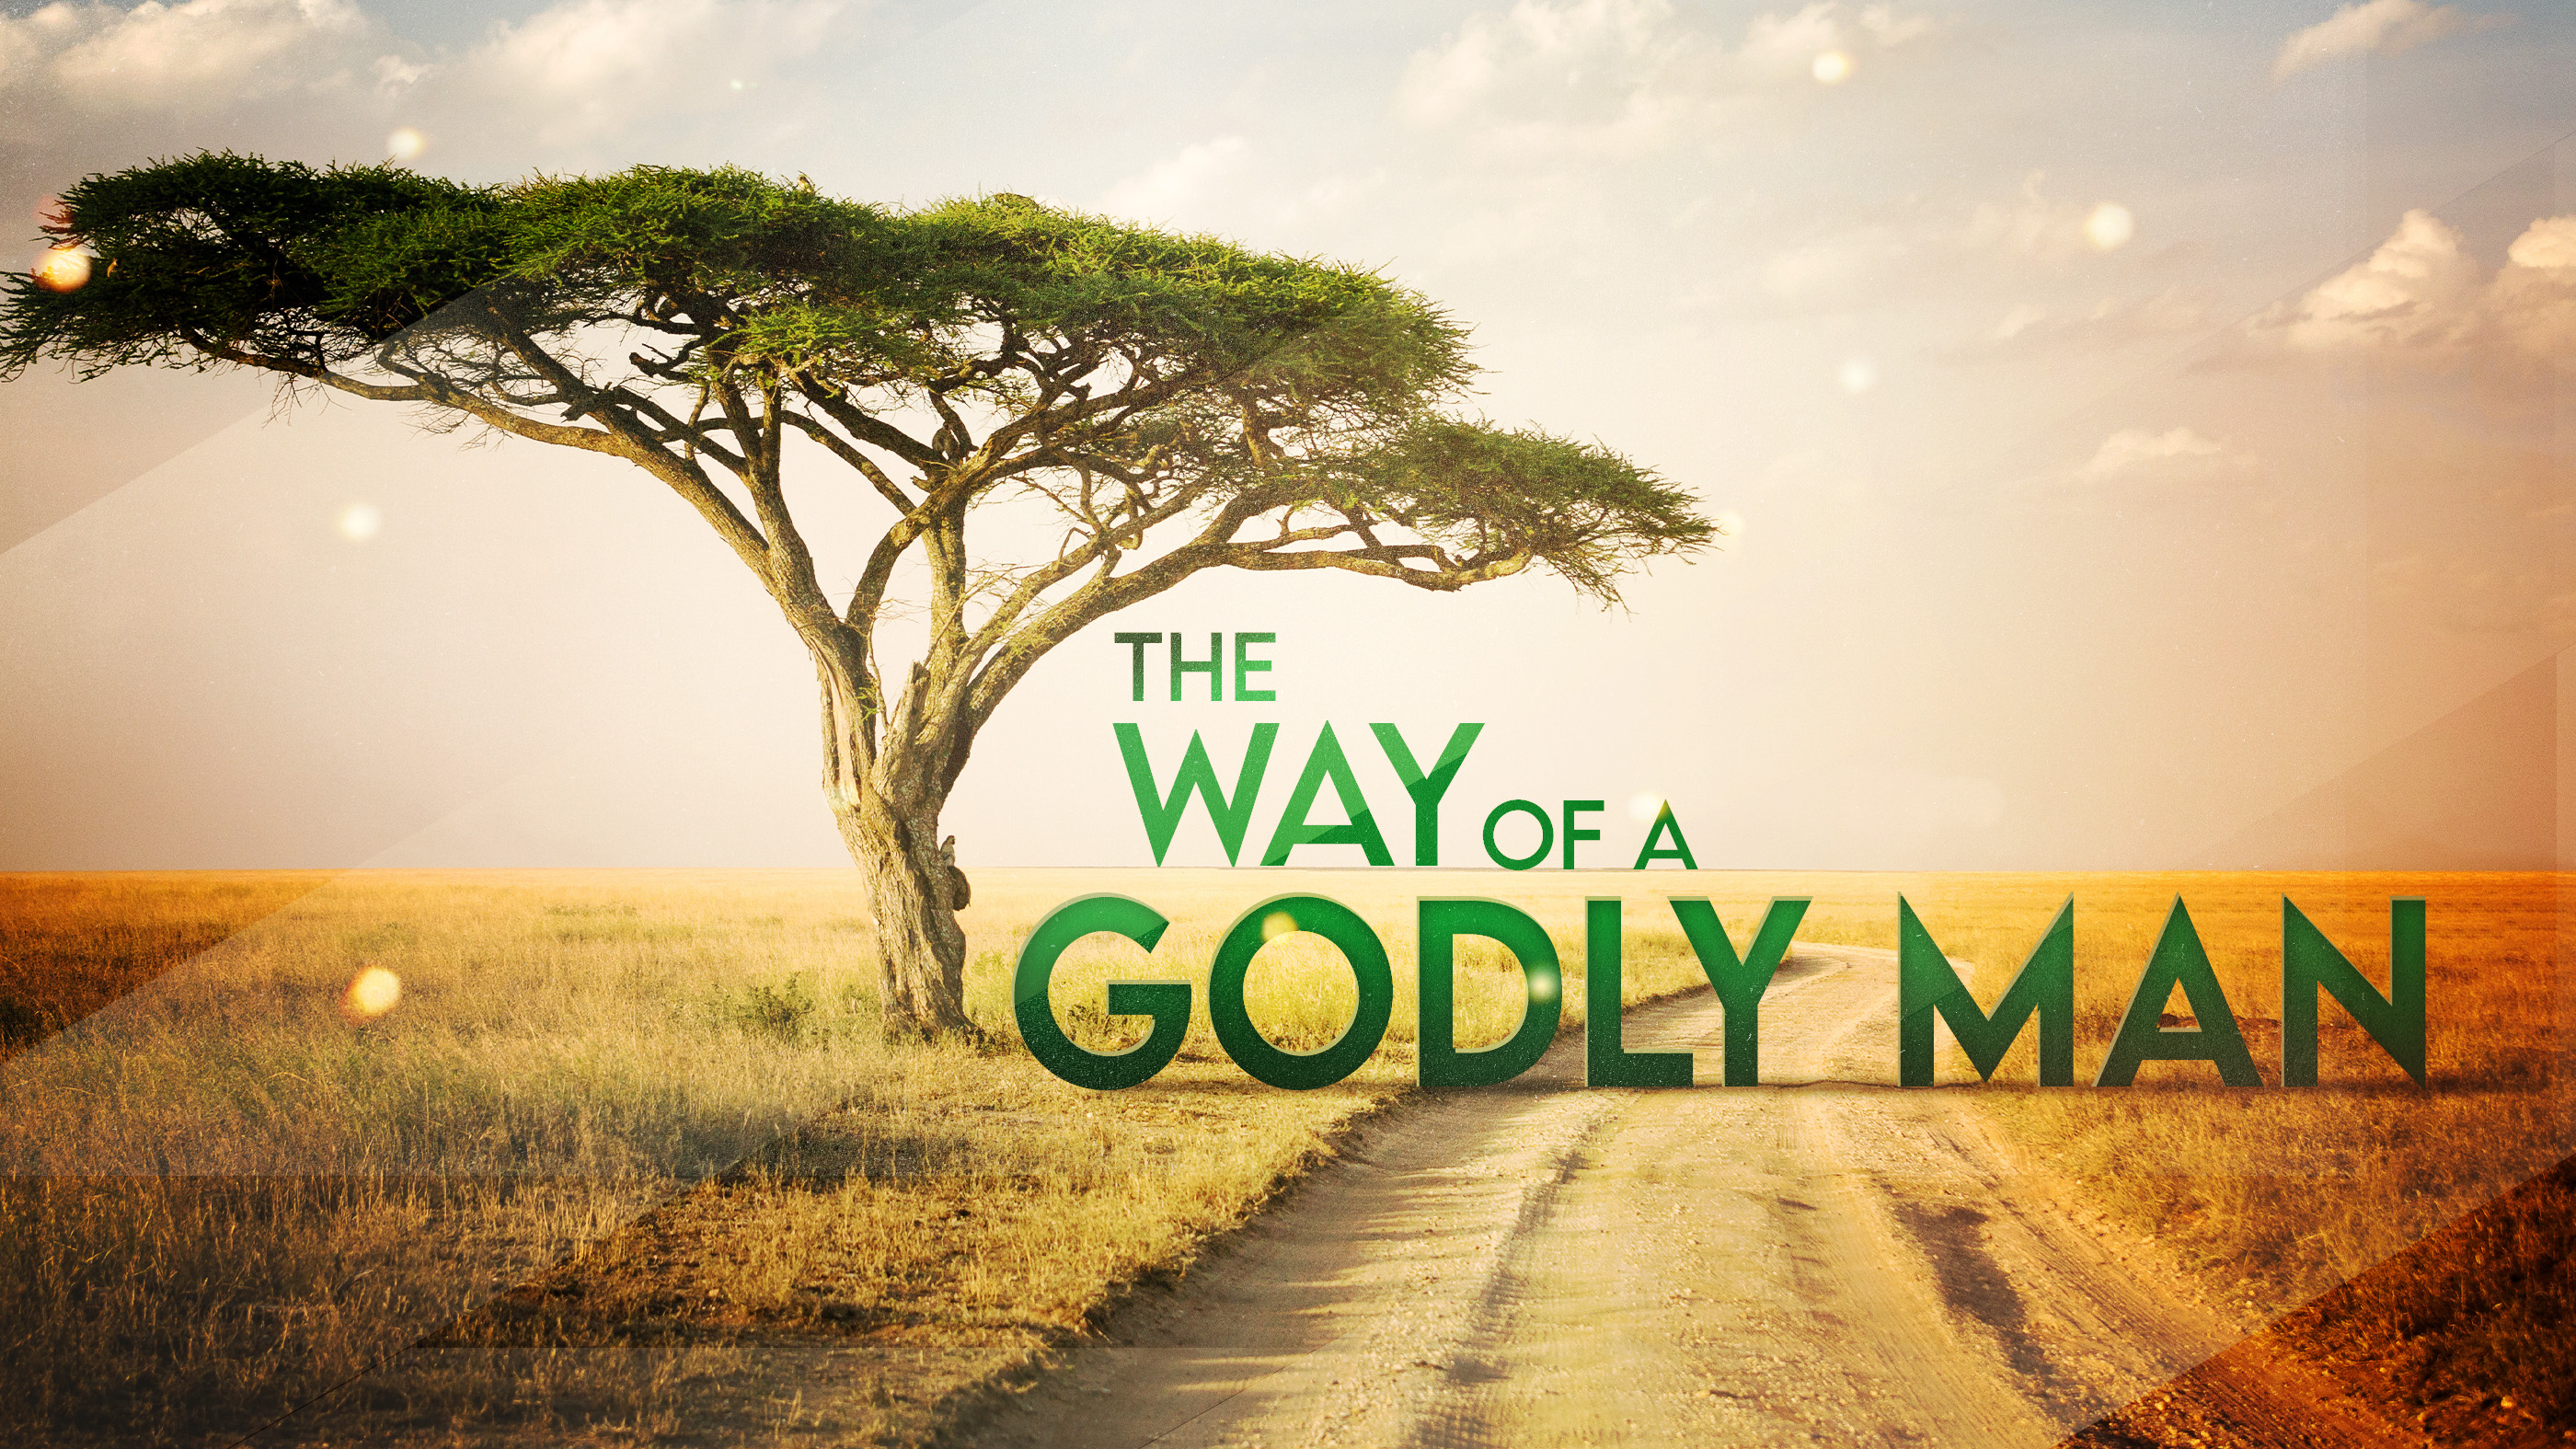 The Way of a Godly Man